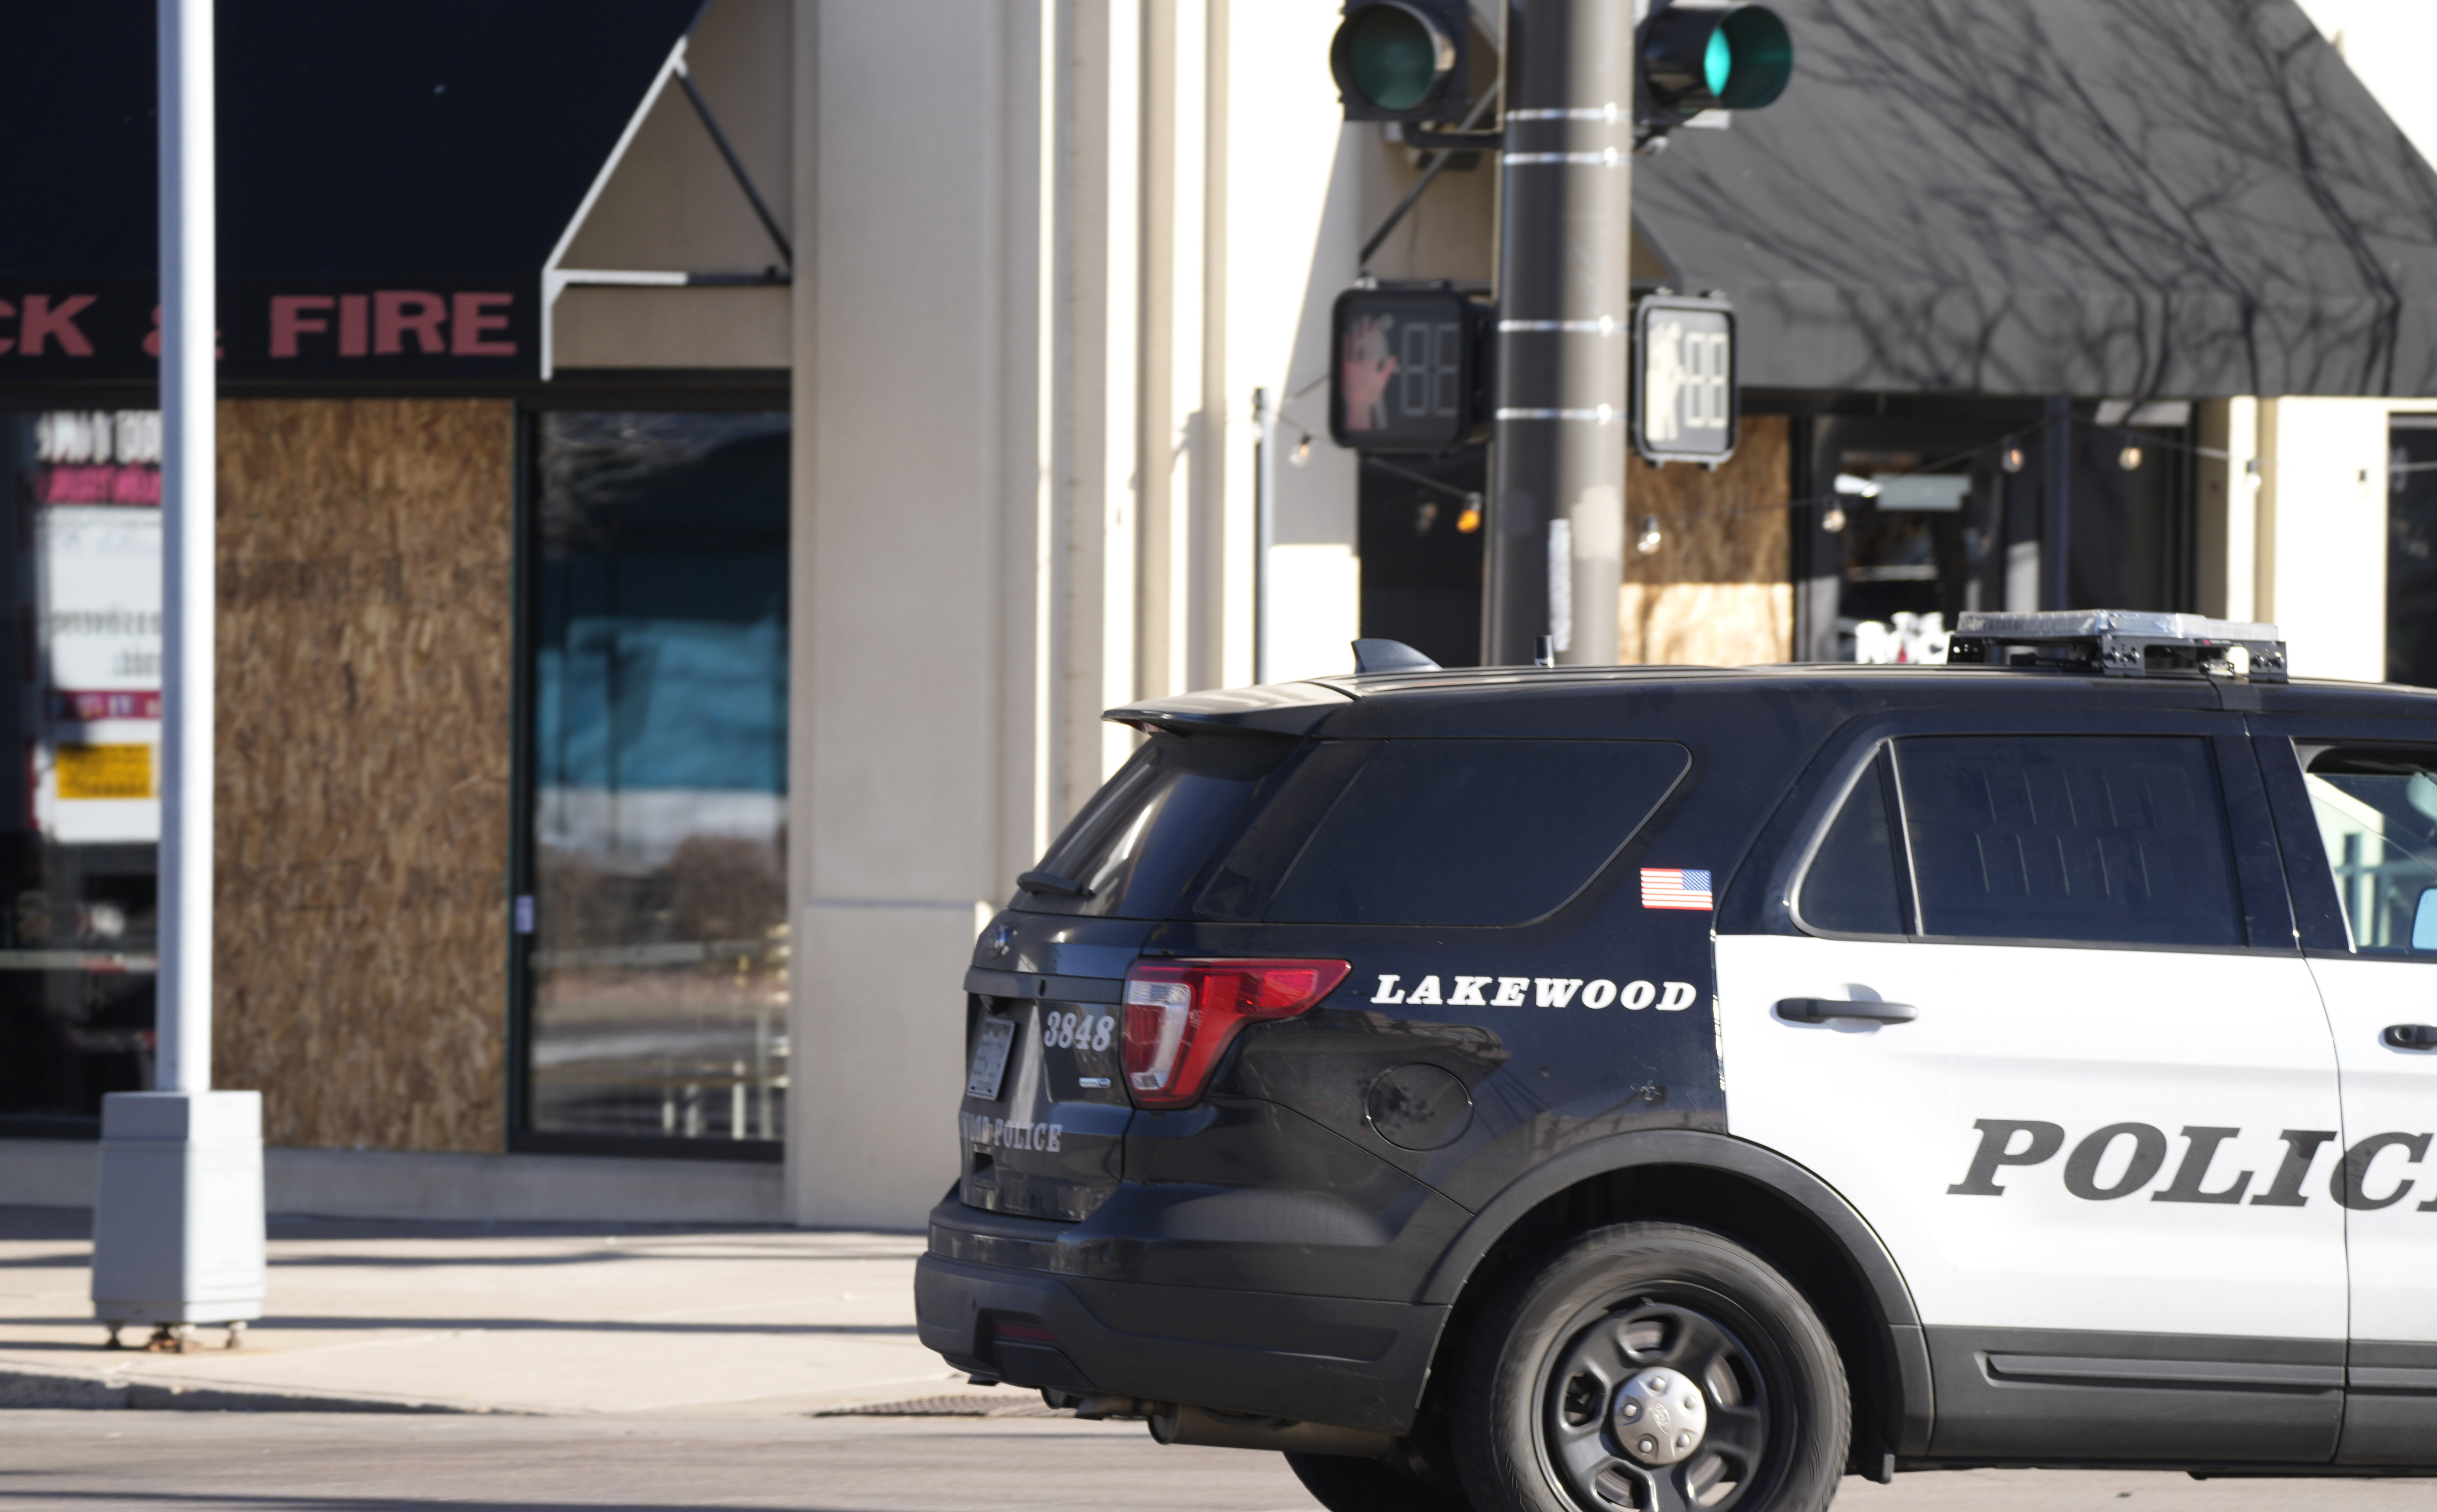 A pizza parlor in Lakewood was another site of the shooting.